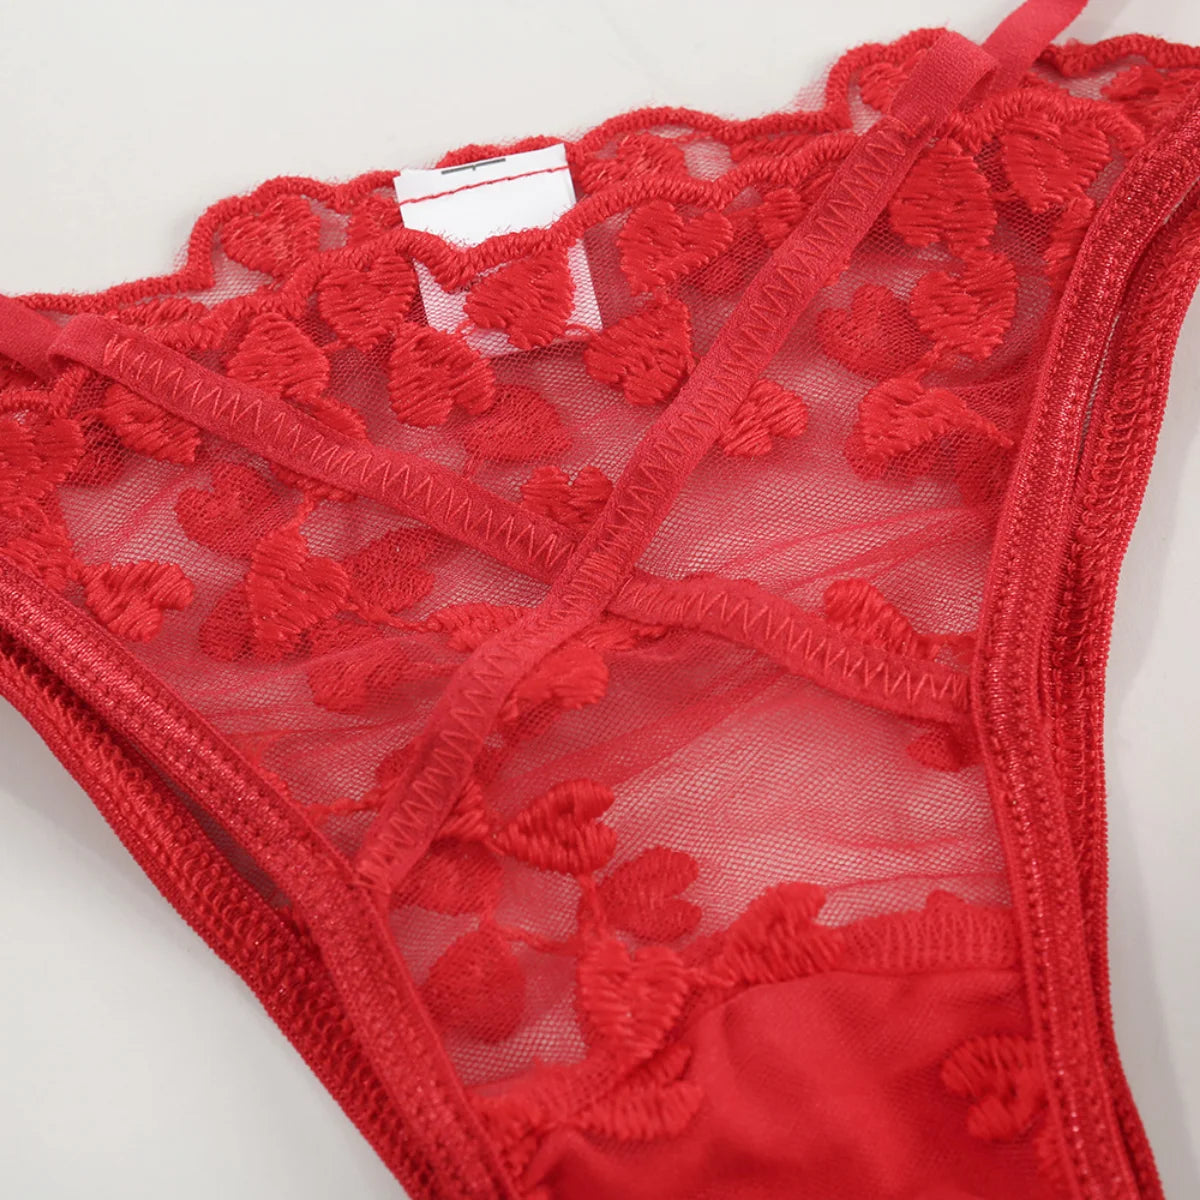 2-Piece heart embrodiery lace lingerie